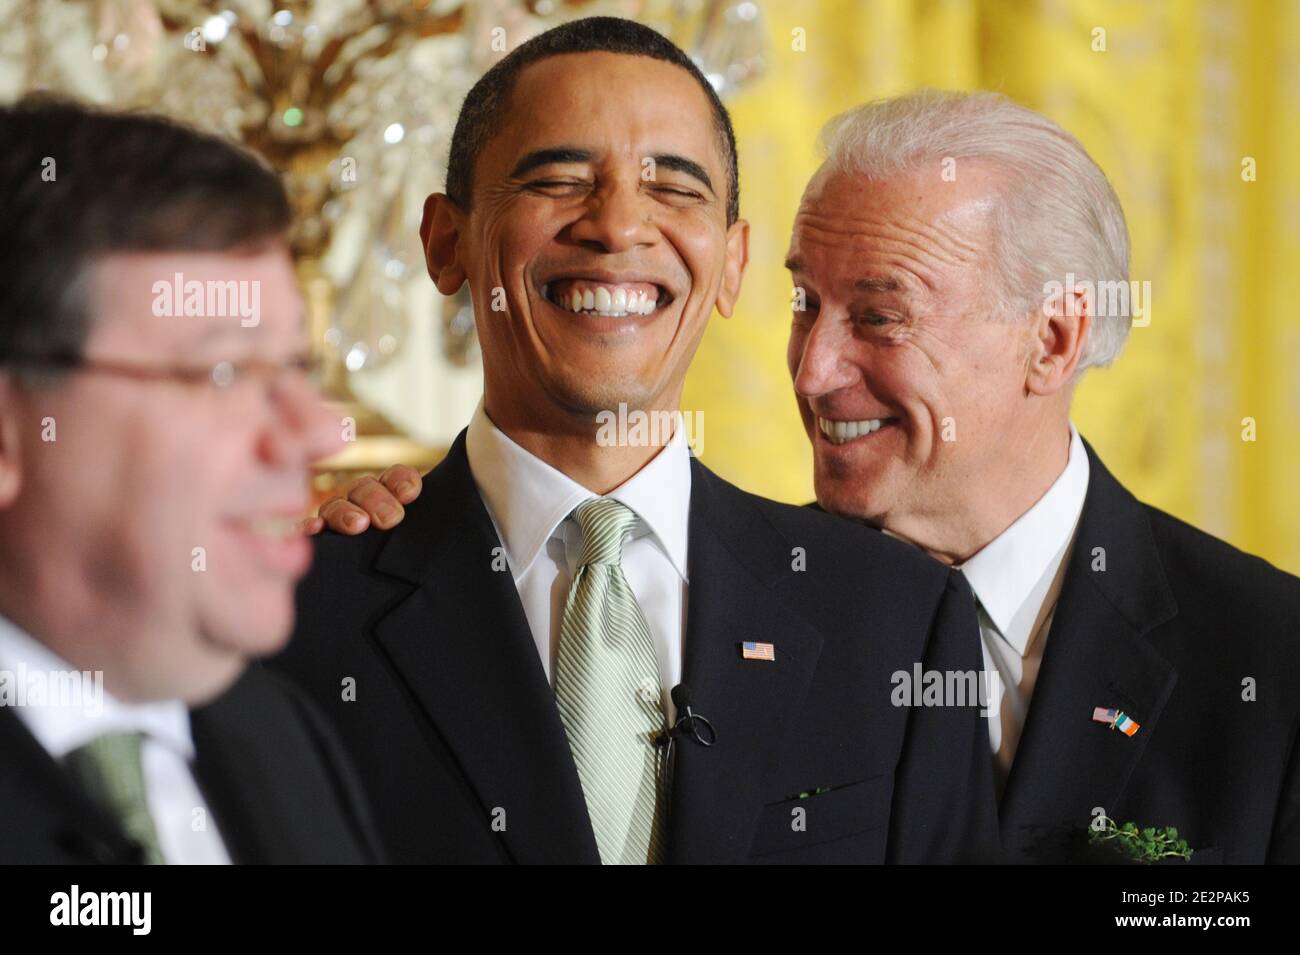 US President Barack Obama (C) and US Vice President Joe Biden (R) laugh while listening to Prime Minister (Taoiseach) of Ireland Brian Cowen (L) during the annual St. Patrick's Day Reception in the East Room of the White House, in Washington DC, USA, on March 17, 2010. President Obama and the Prime Minister (Taoiseach) of Ireland Brian Cowen delivered remarks and participated in a traditional Shamrock ceremony. Photo by Michael Reynolds/Pool/ABACAPRESS.COM Stock Photo